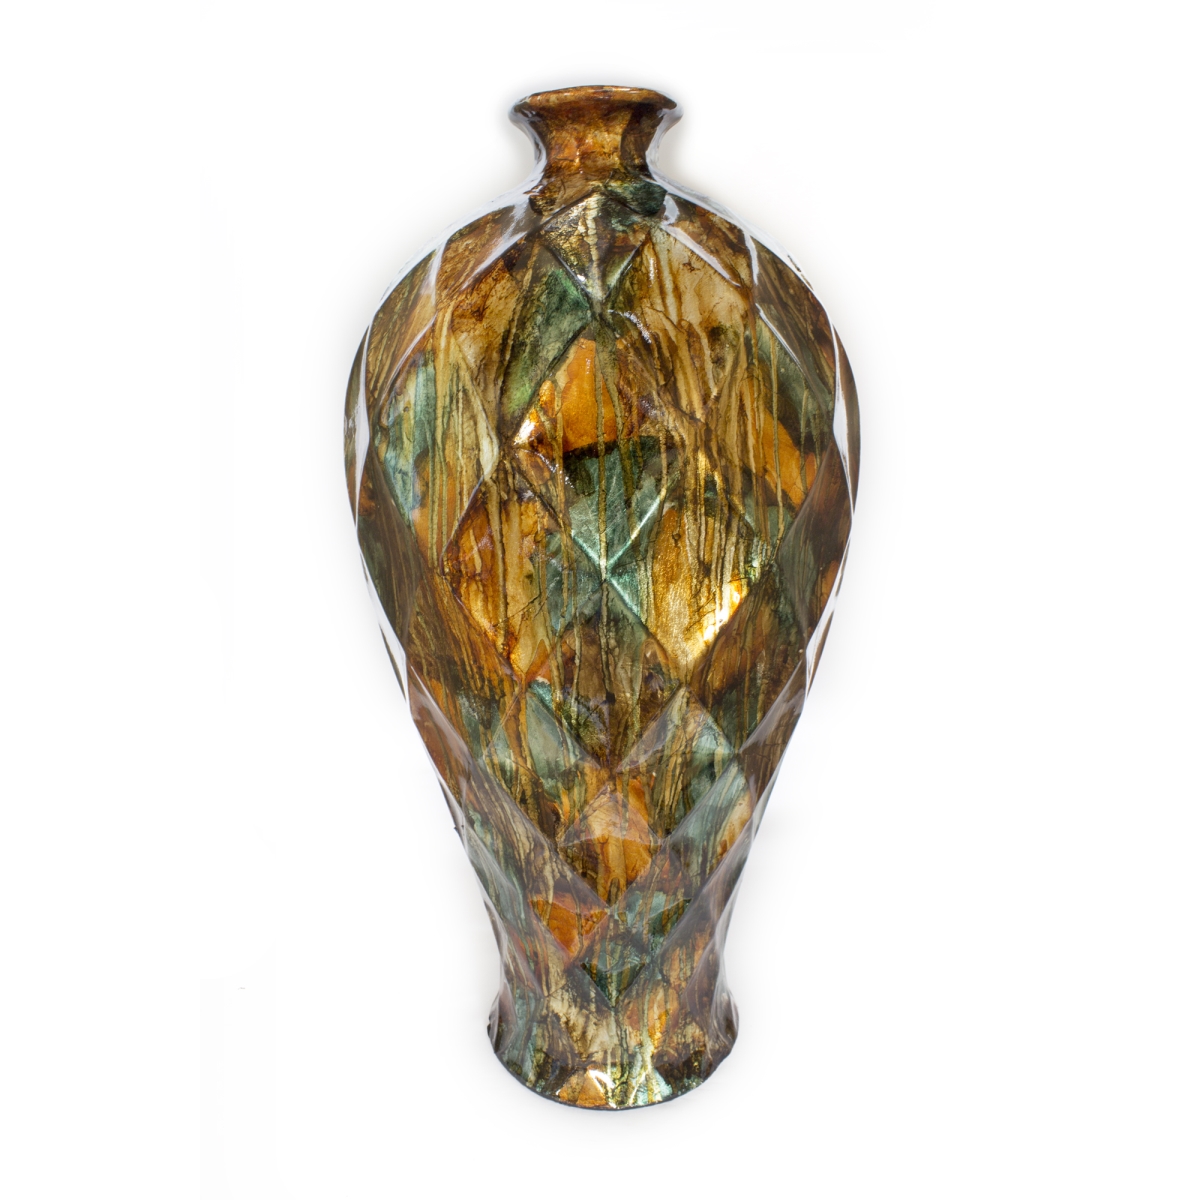 W1273-04 20 In. Tinsley Foiled & Lacquered Floor Vase - Turquoise, Copper & Bronze